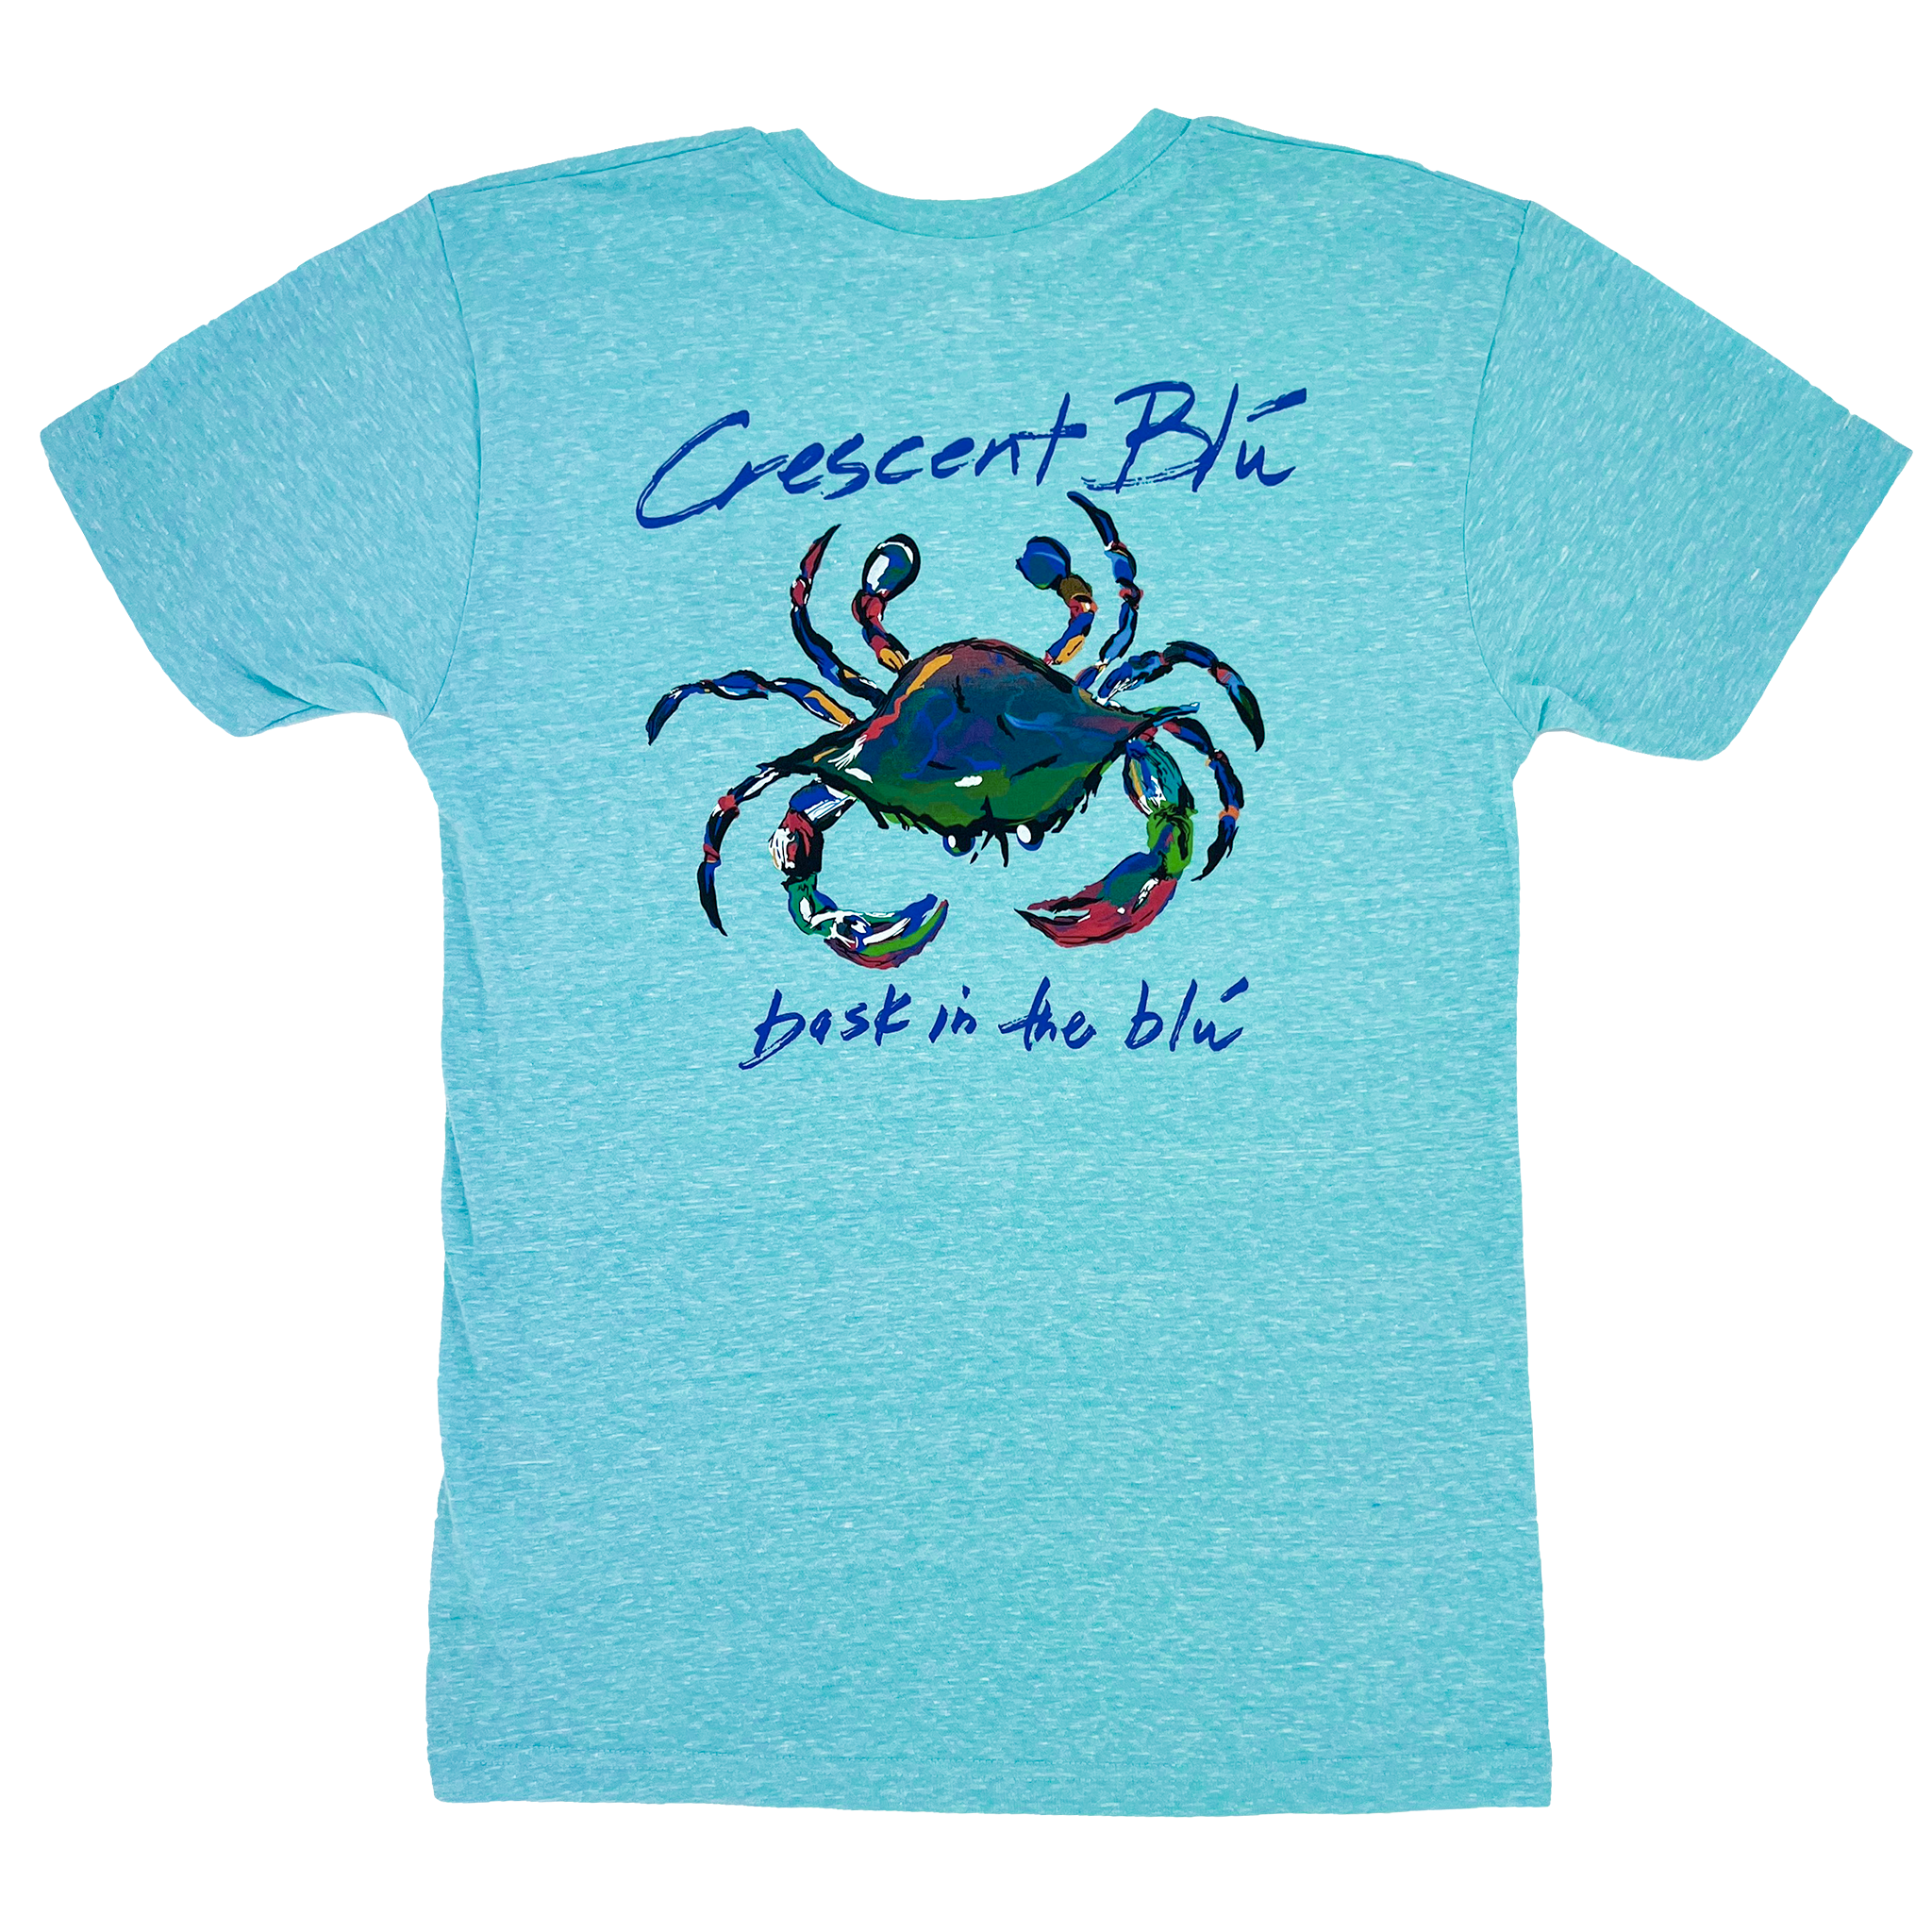 Back view of short sleeve adult Crescent Blu multi-colored crab logo with Crescent Blu and Bask in the Blu printed above and below. Carribean Malange color.